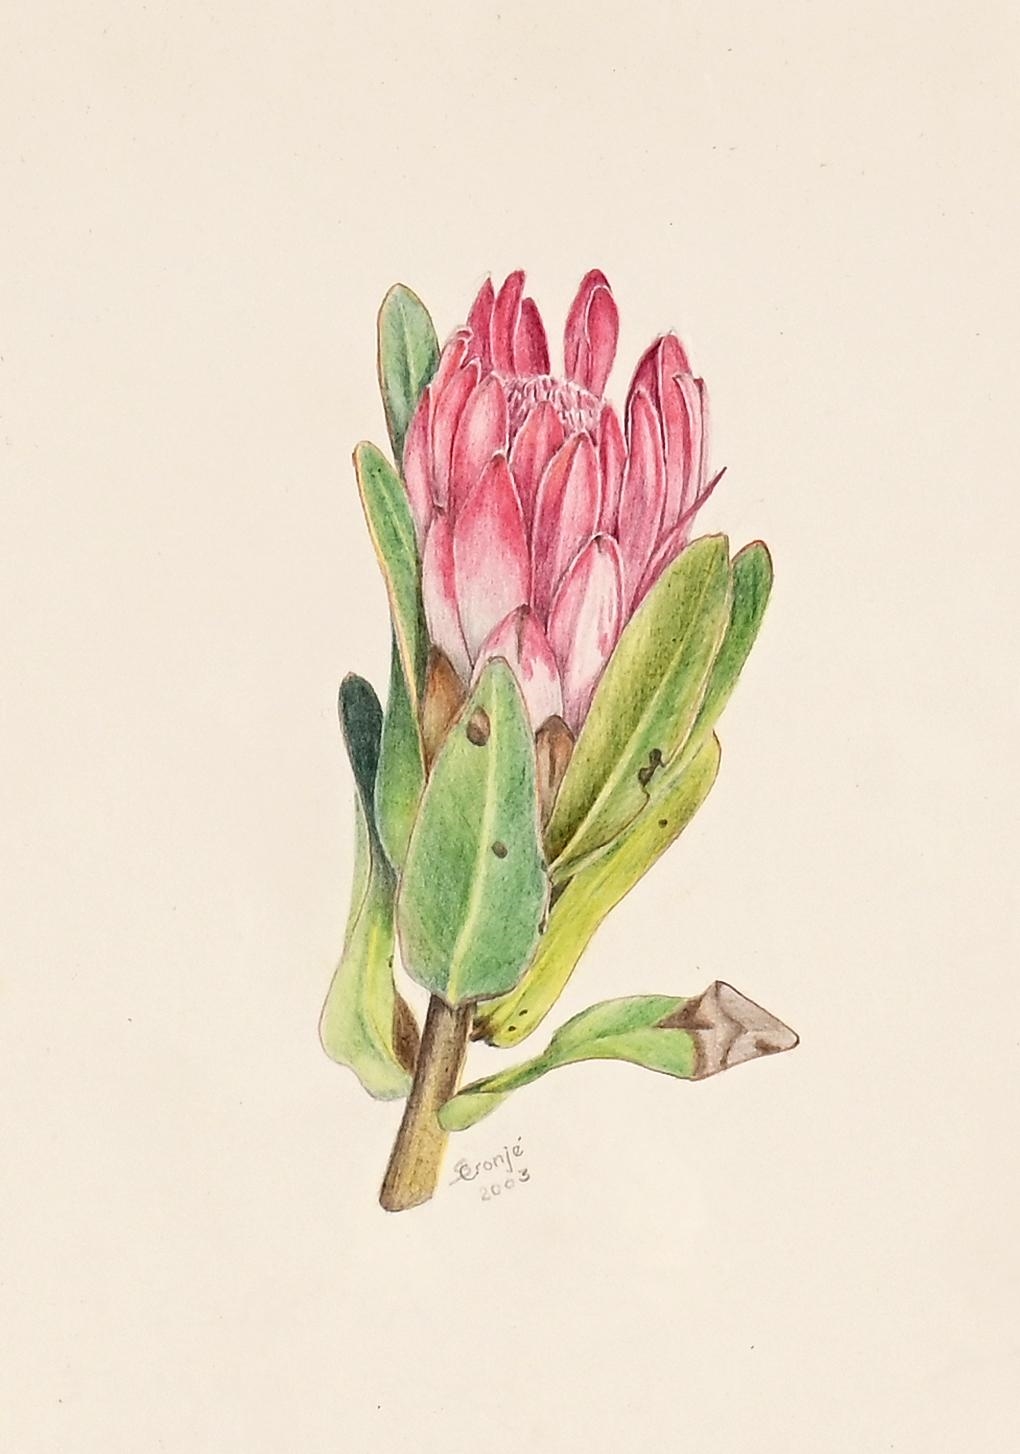 Protea by Susan Cronje, dated 2003